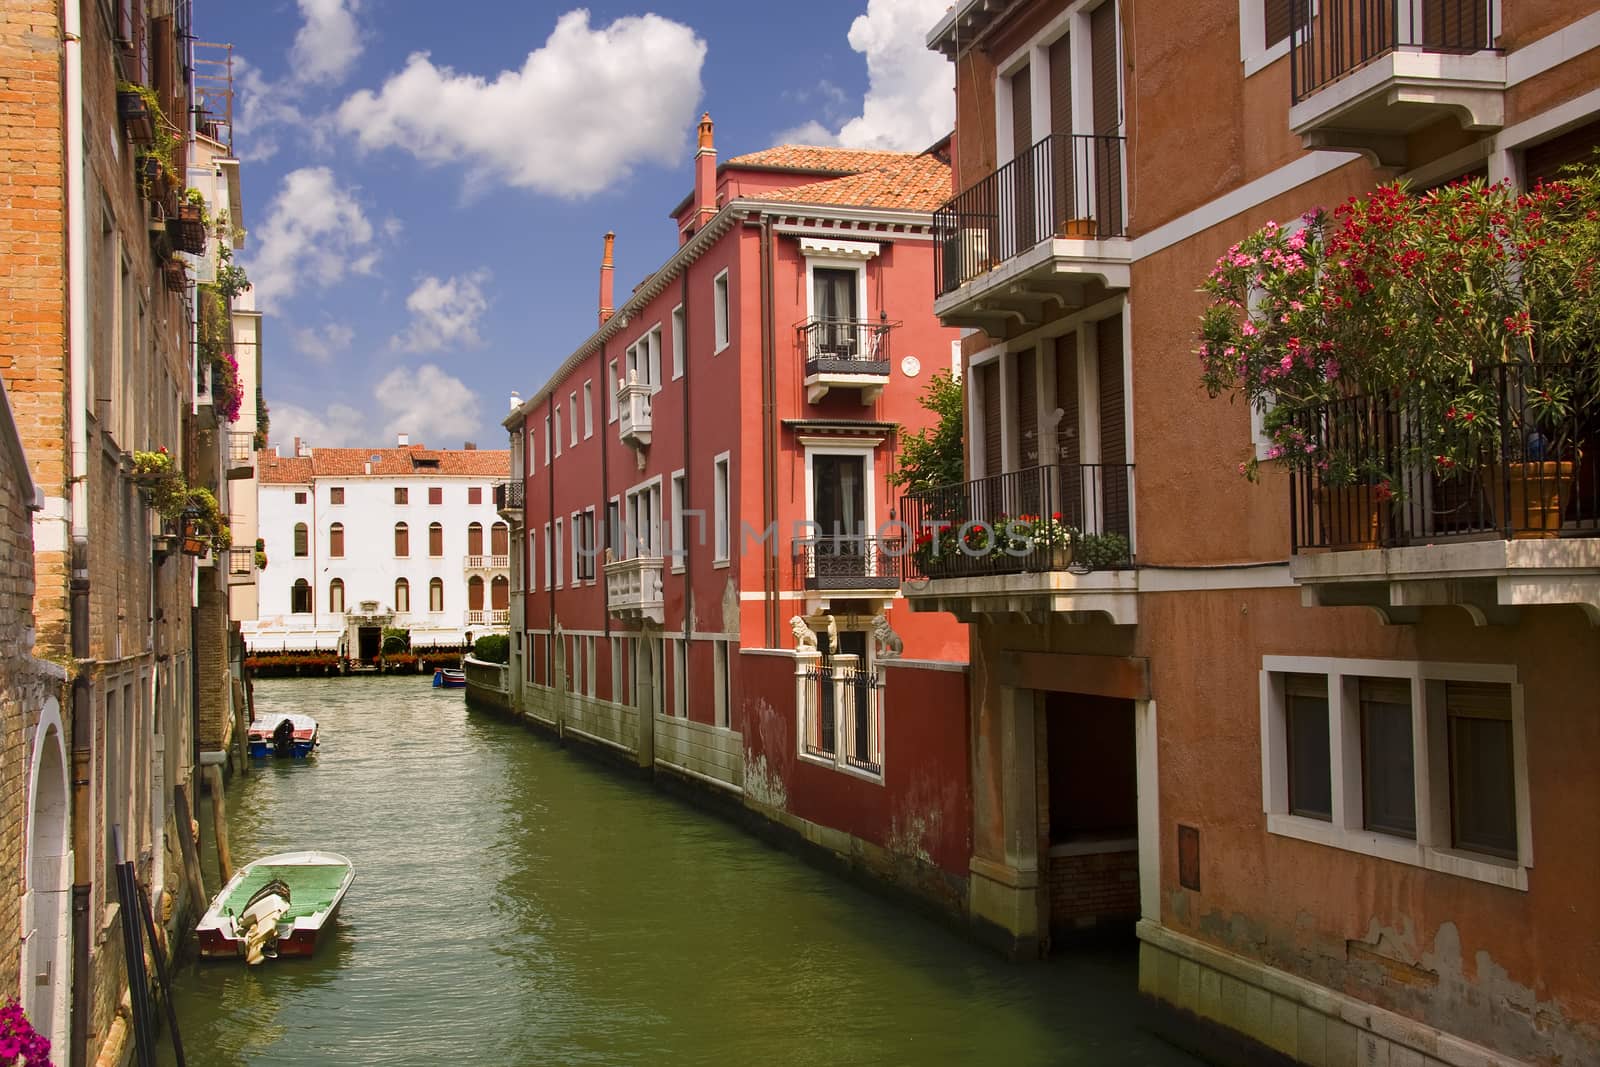 Typical water street in Venice, Italy